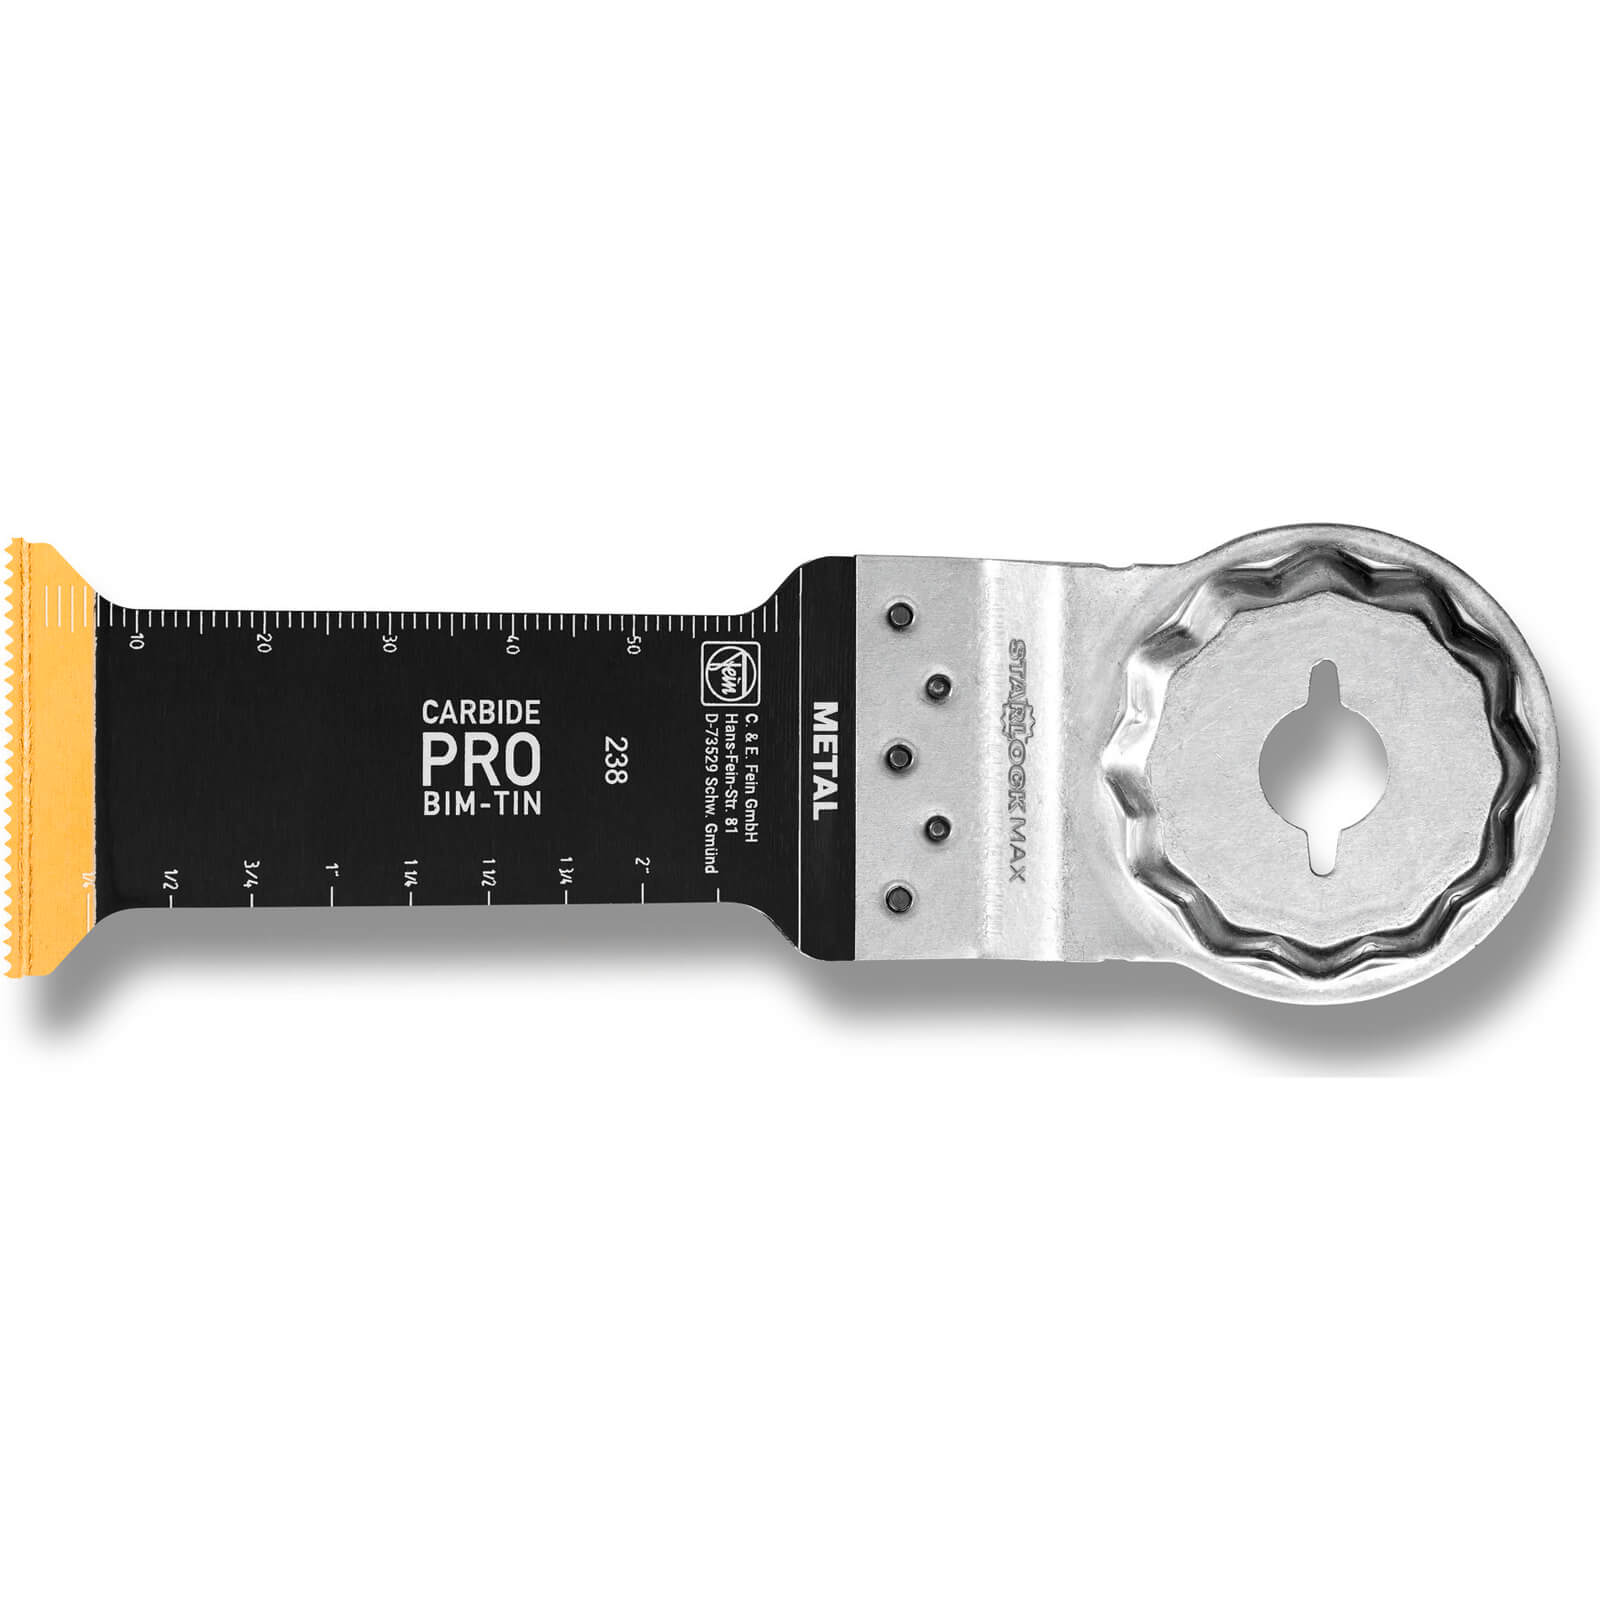 Fein E-Cut Carbide Pro Starlock Max Oscillating Multi Tool Plunge Saw Blade 32mm Pack of 1